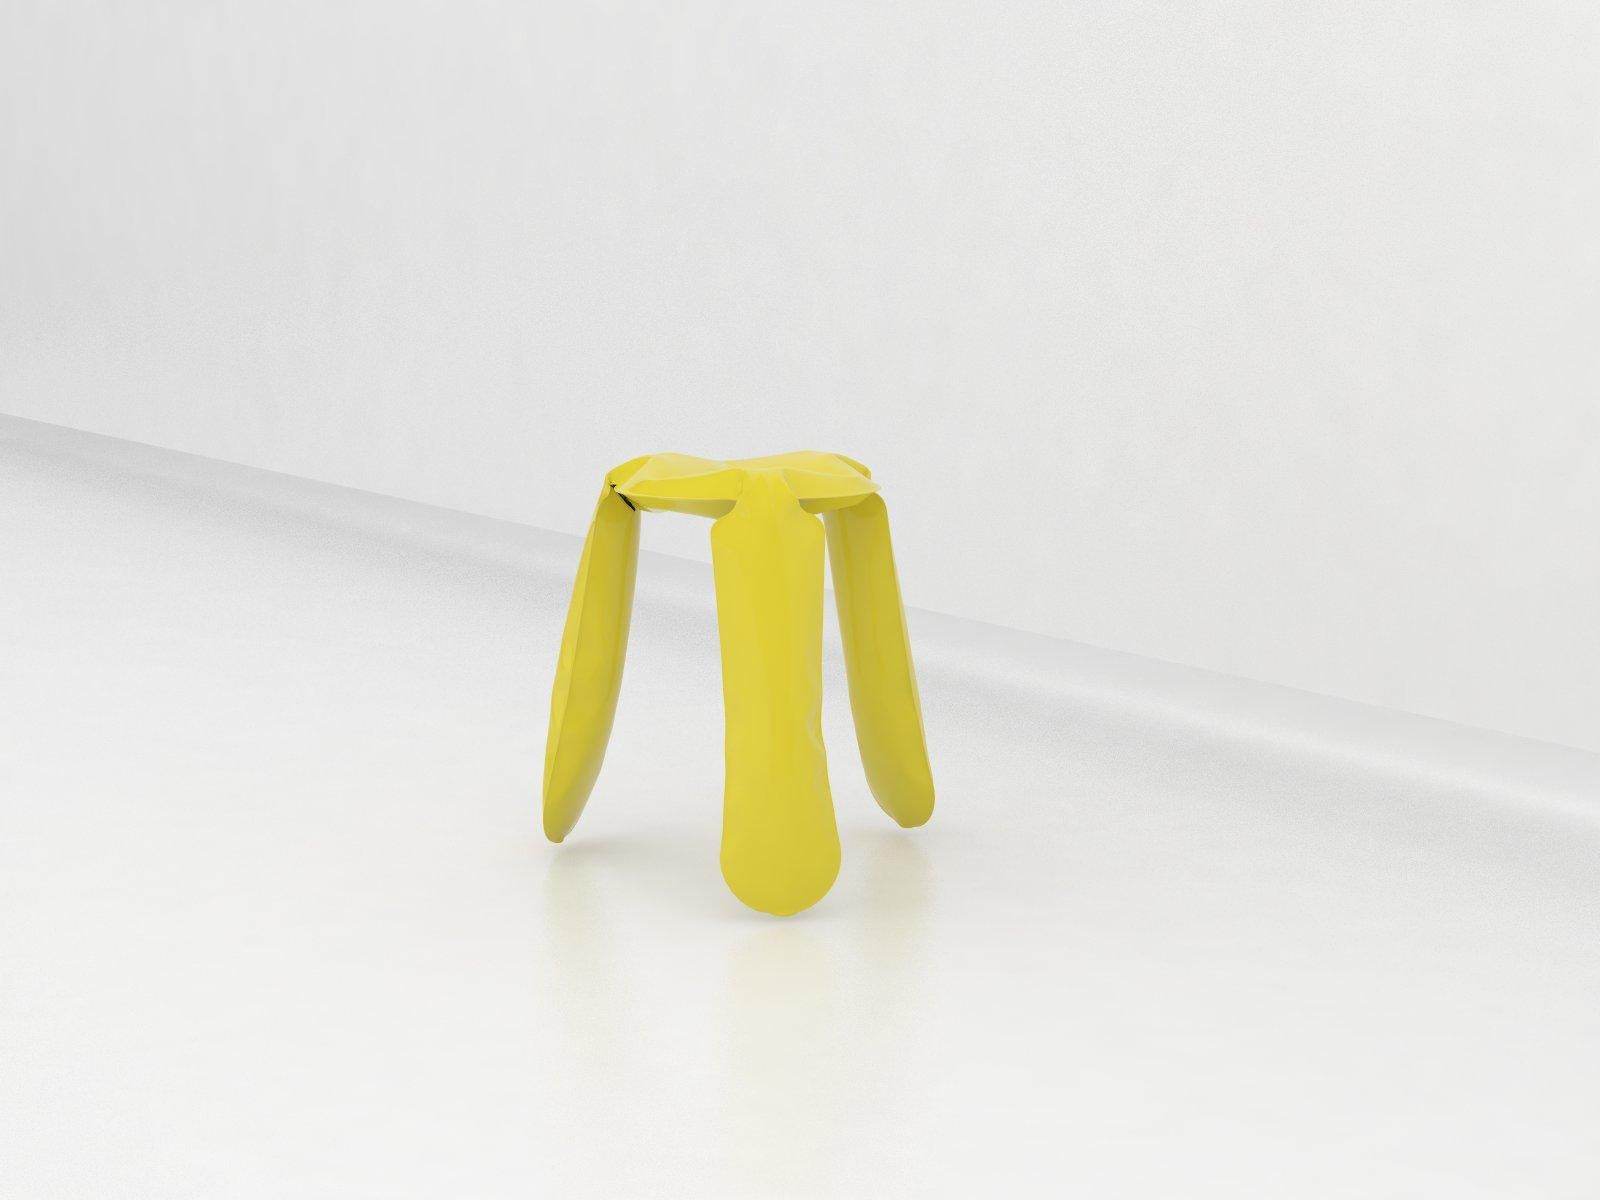 Plopp stool is an icon and a bestseller of Zieta Prozessdesign. The unique, toy-looking and playful shape of Plopp is an effect of an innovative forming method FIDU. FIDU technology means that two ultra-thin steel sheets are welded together around